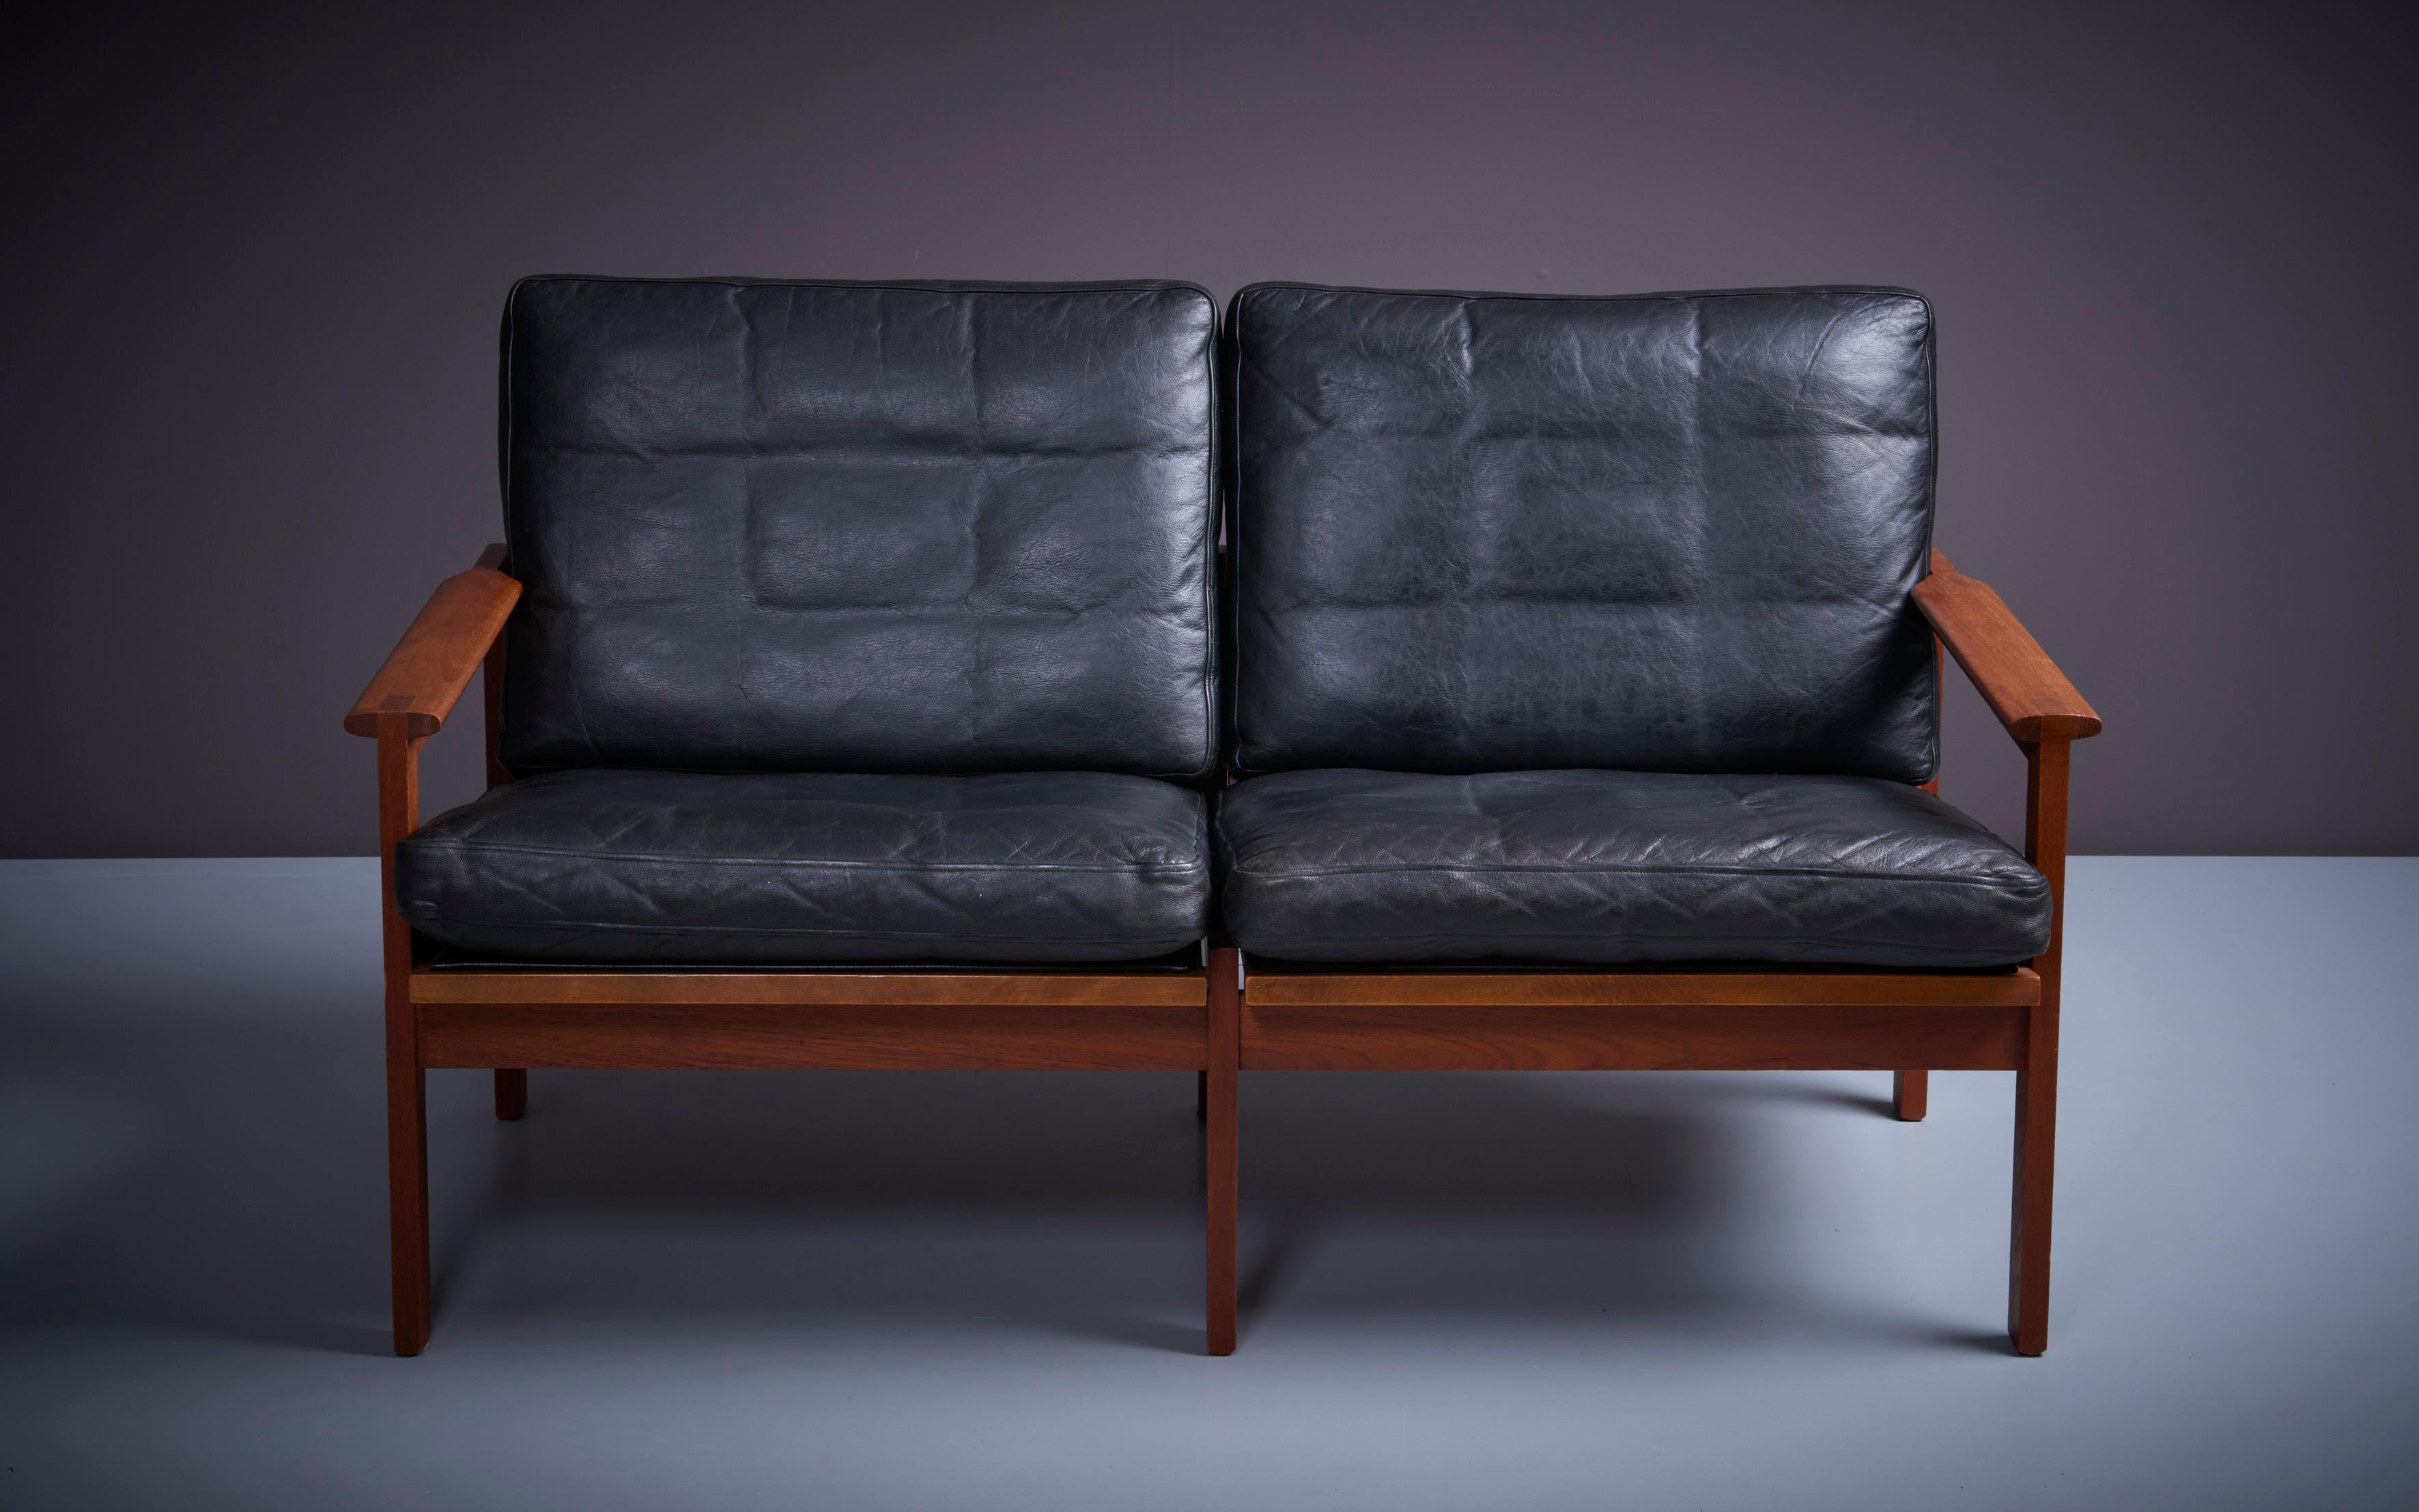 Illum Wikkelso 'Capella' Set of 2x Black Leather Sofa & Side Table Denmark 1960s For Sale 6